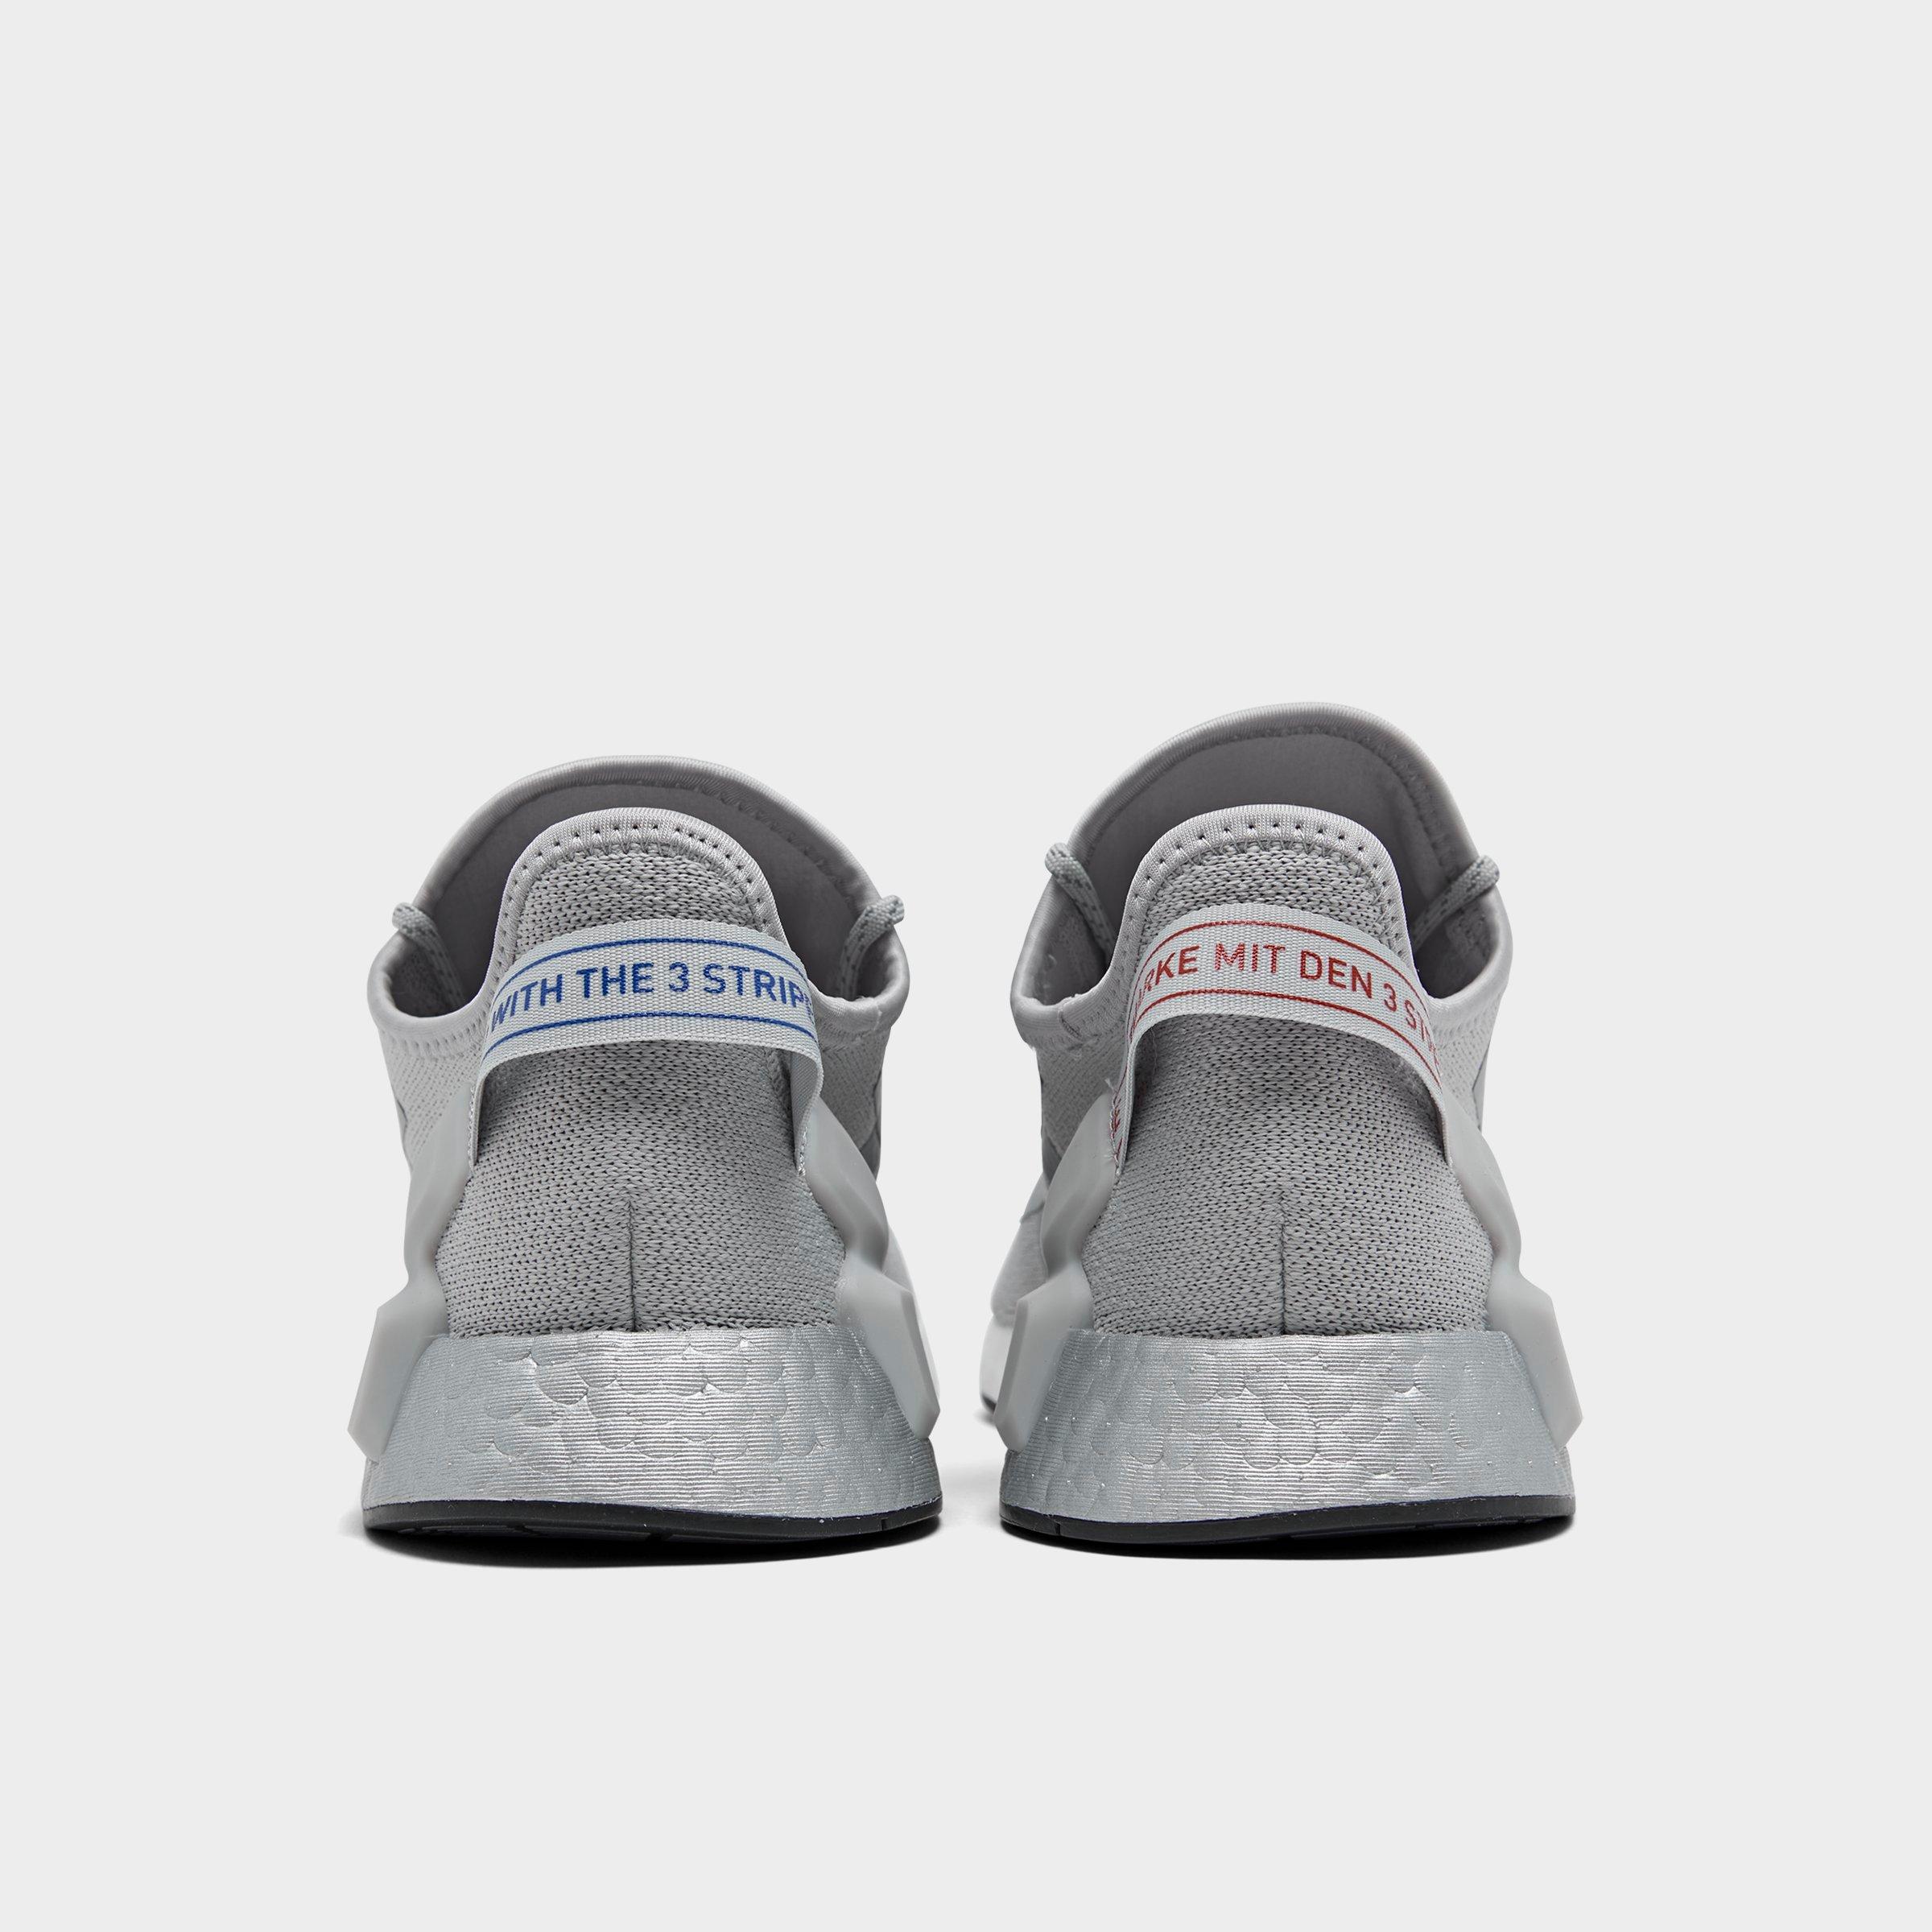 ADIDAS NMD R1 BD7755 Group Purchase and PTT Recommendation 2020 Month